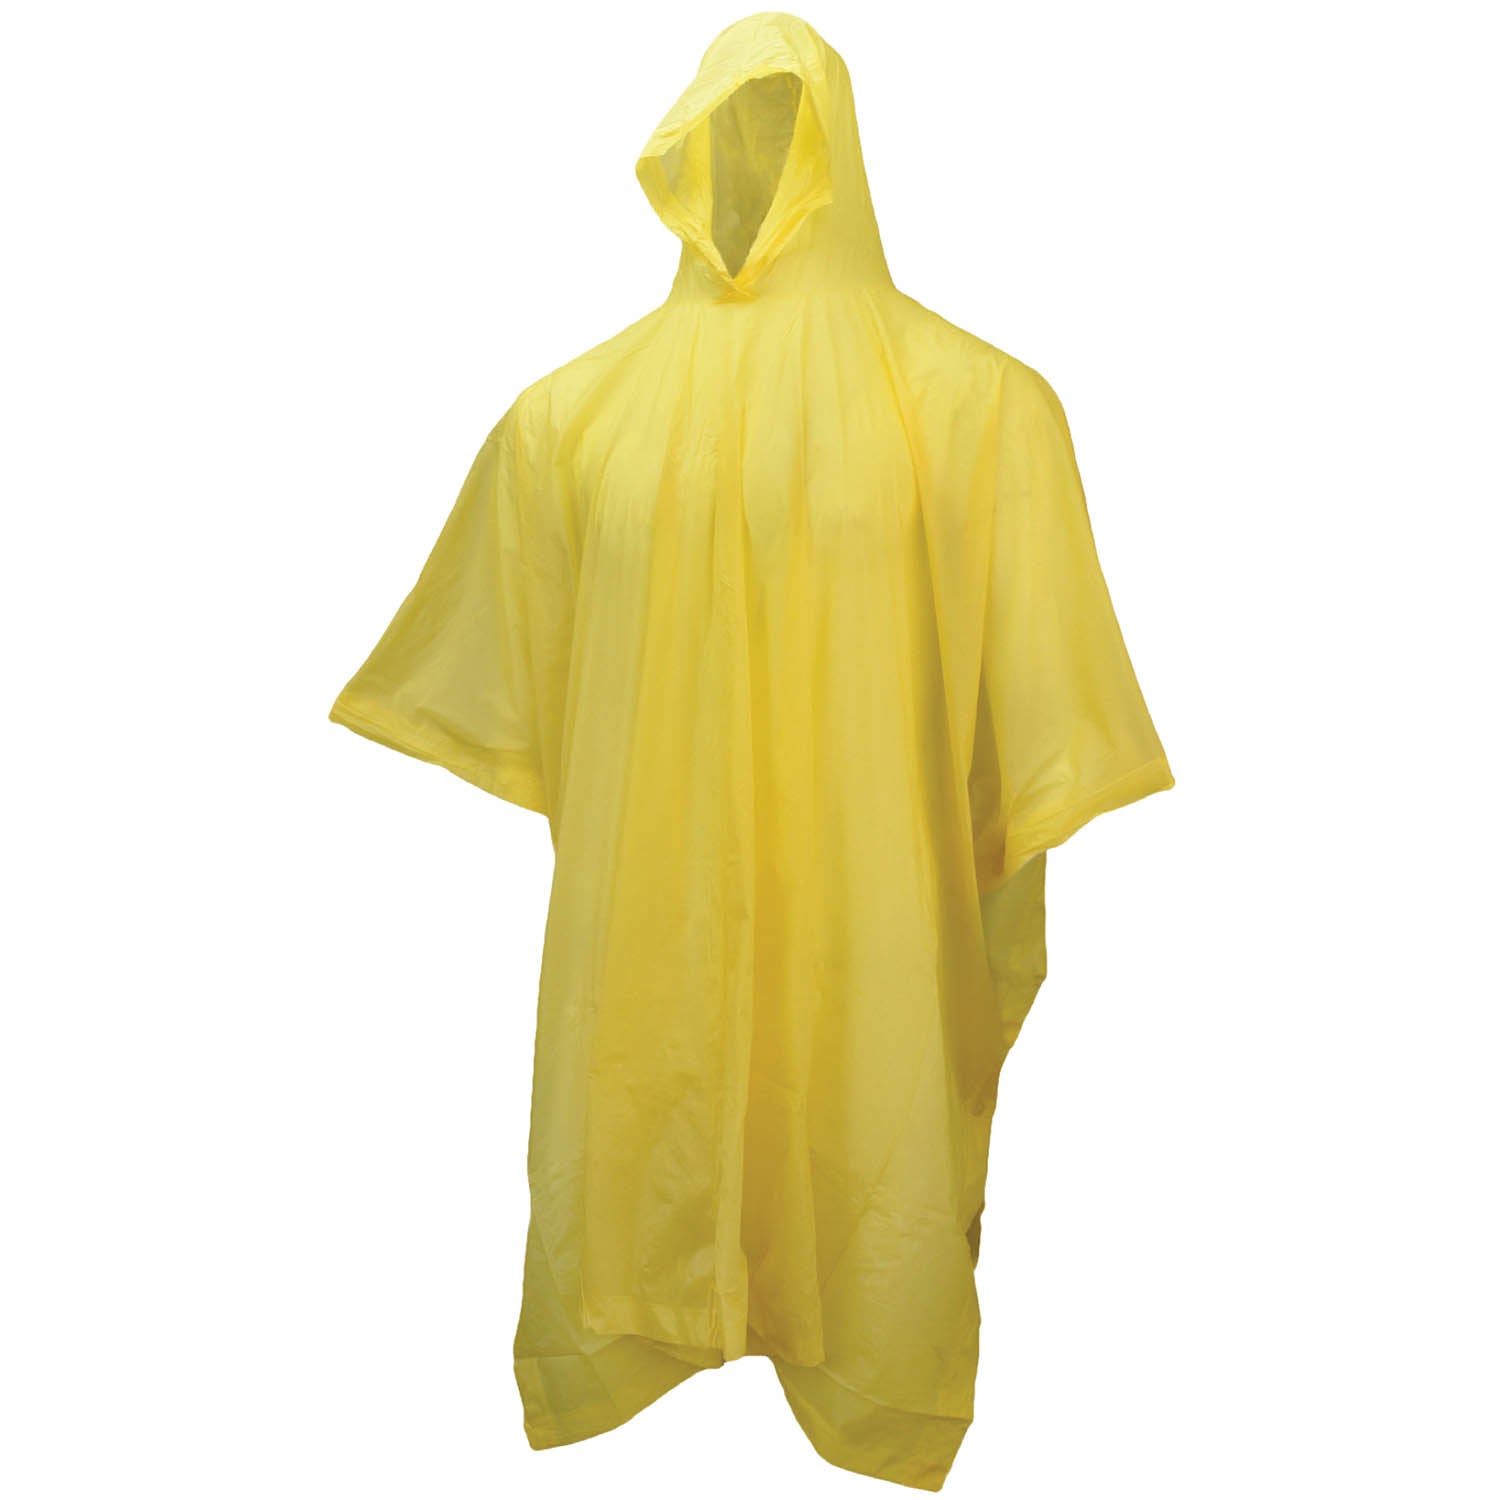 Neese 40" Economy Rain Poncho with Attached Hood